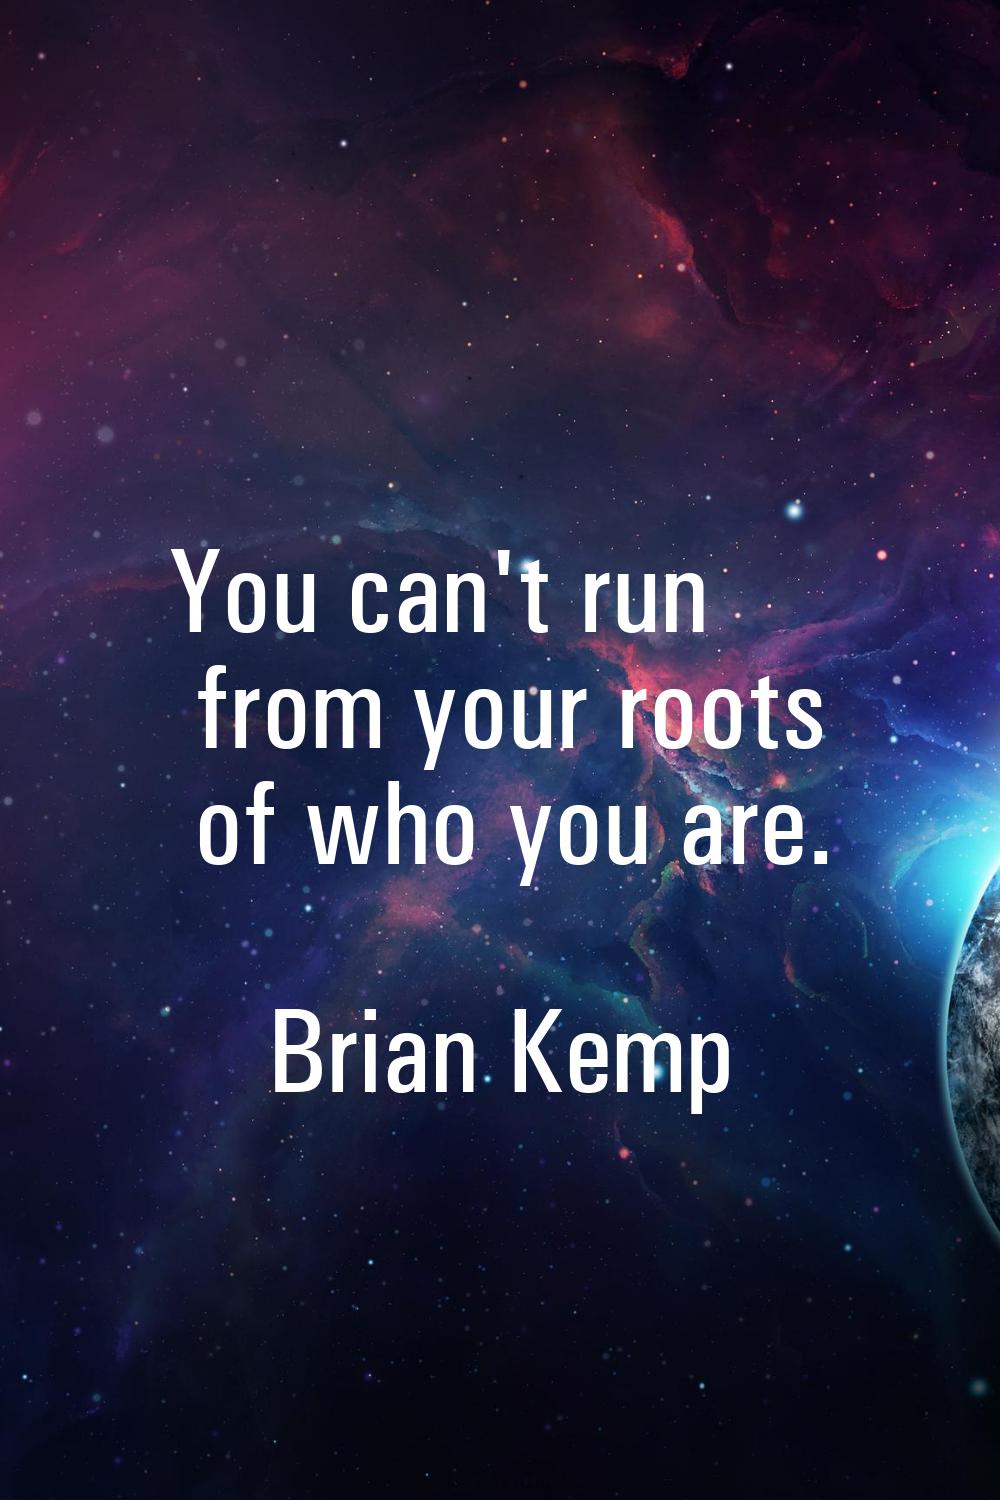 You can't run from your roots of who you are.